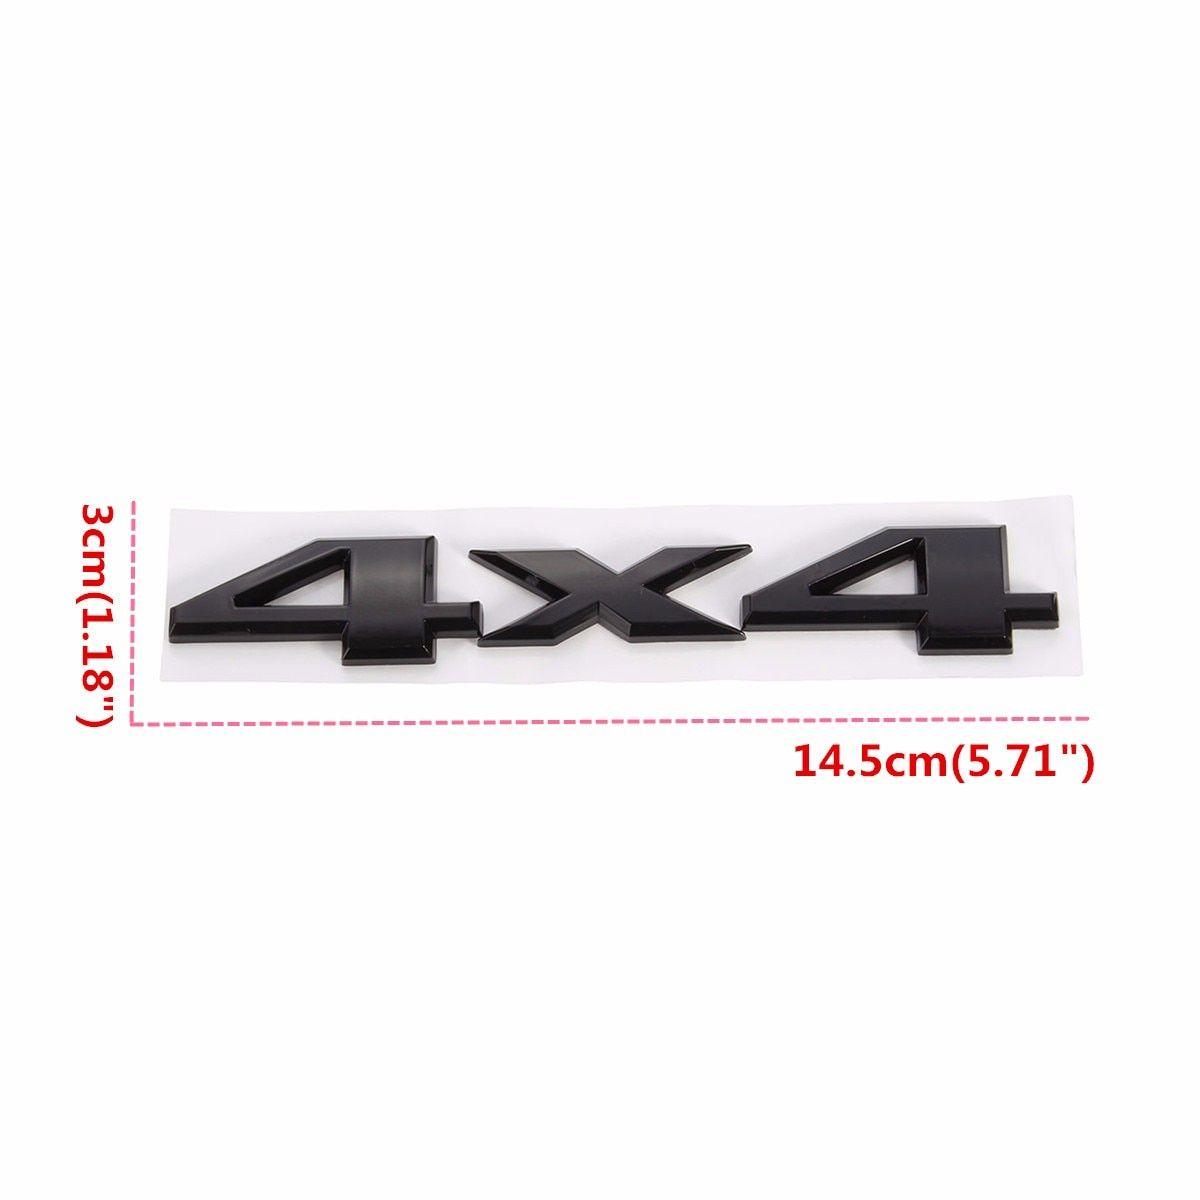 4x4 Logo - US $1.99 |3D 4x4 Emblem Badge Car Sticker Logo Decal For Jeep /Grand  /Cherokee Black Silver-in Car Stickers from Automobiles & Motorcycles on ...